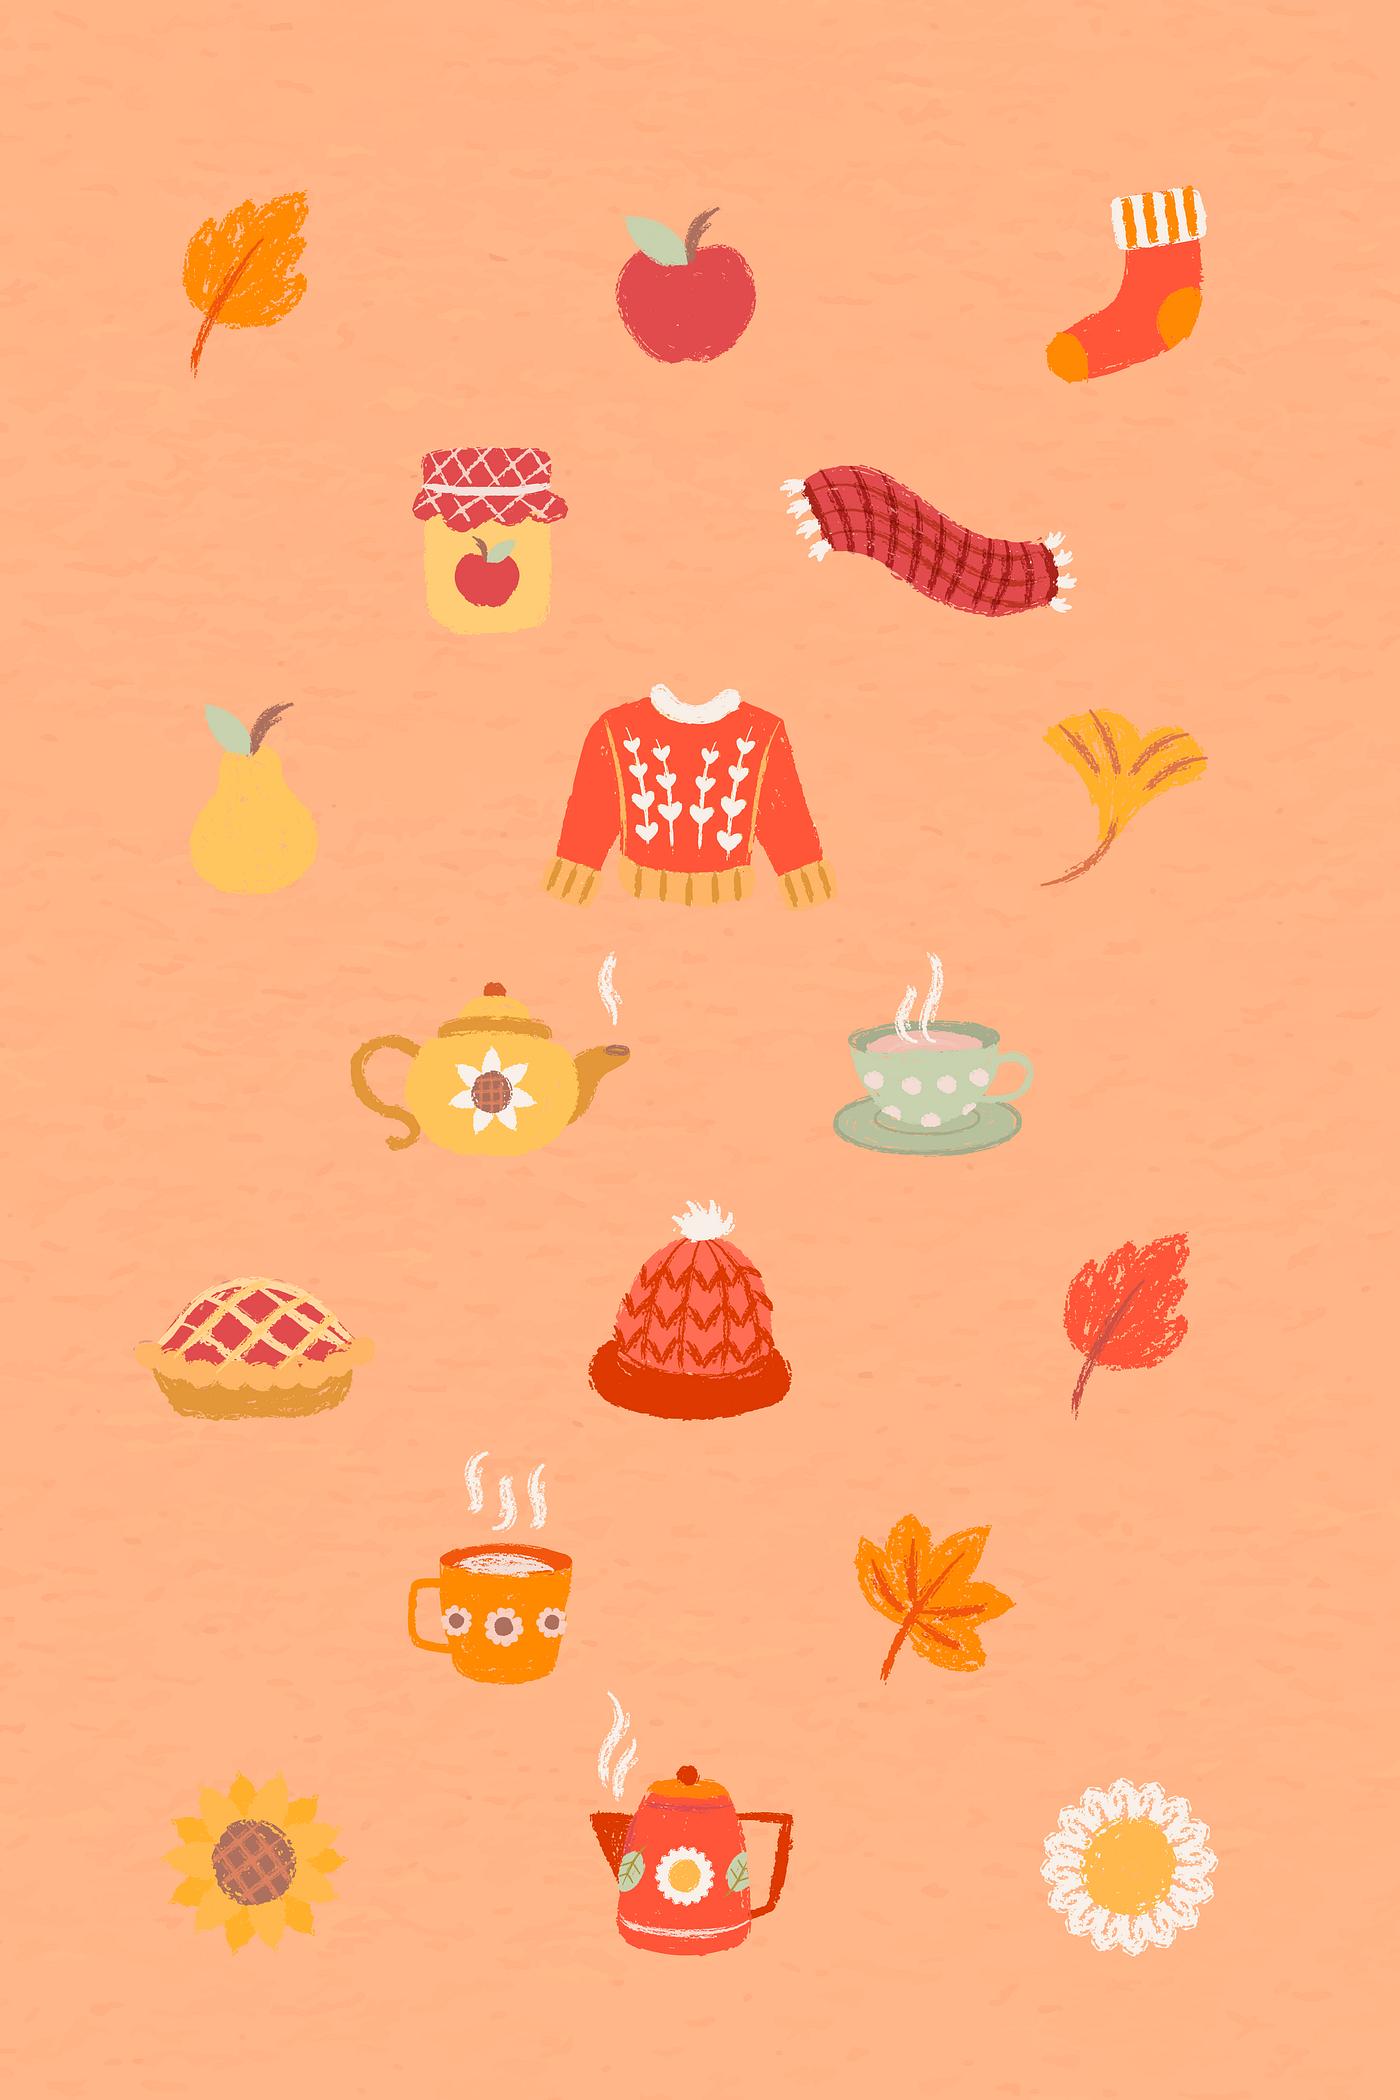 Autumn and Fall themed set | Royalty free vector - 1180919